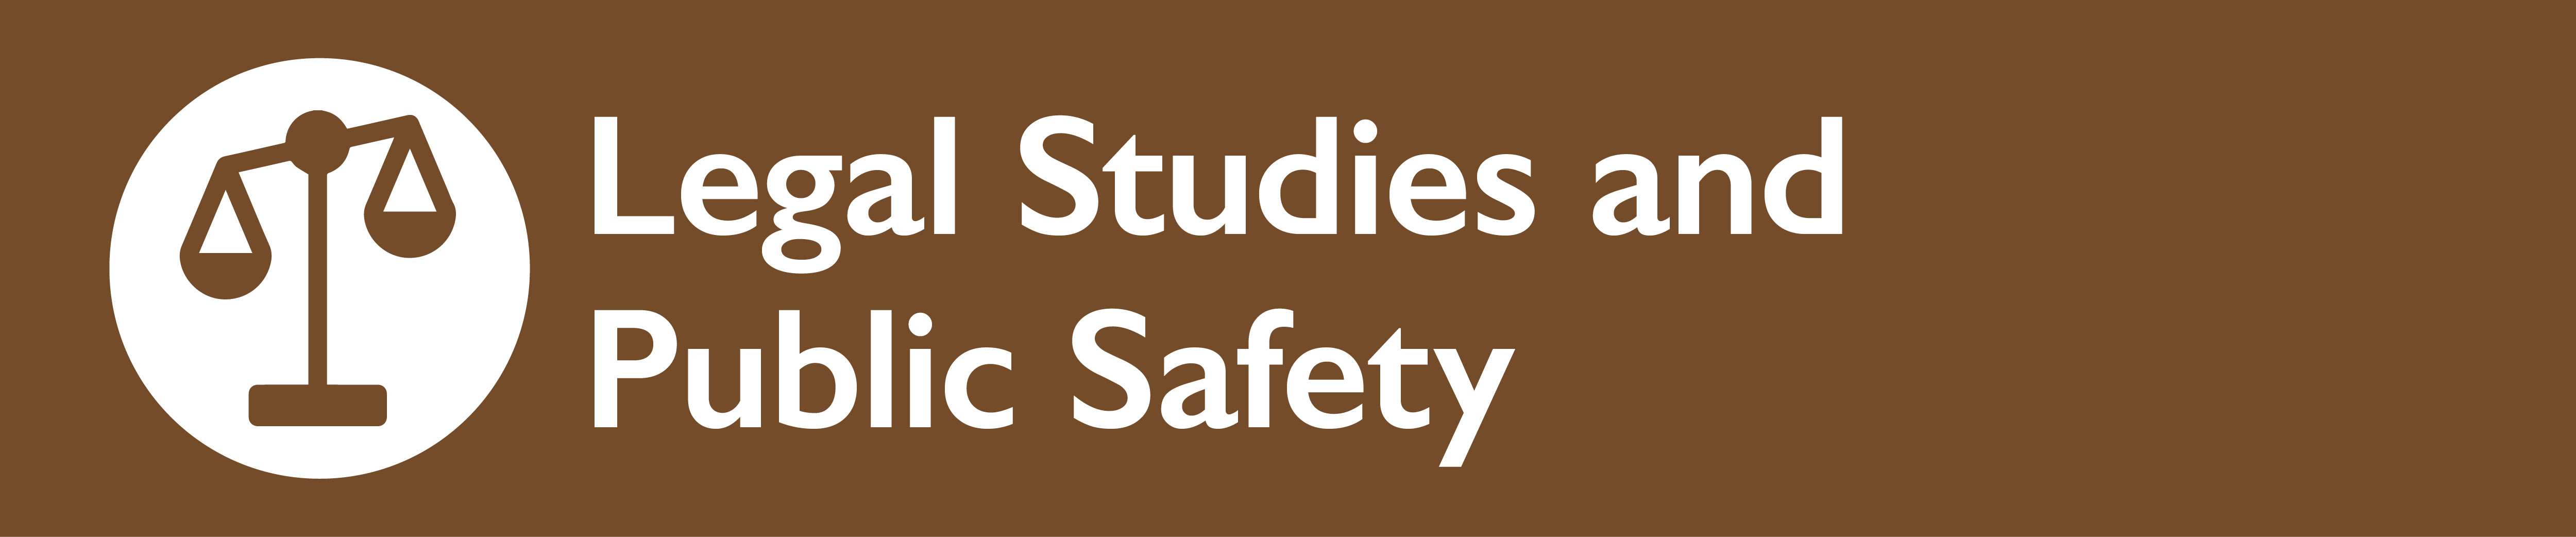 Legal Studies and Public Safety Field of Interest